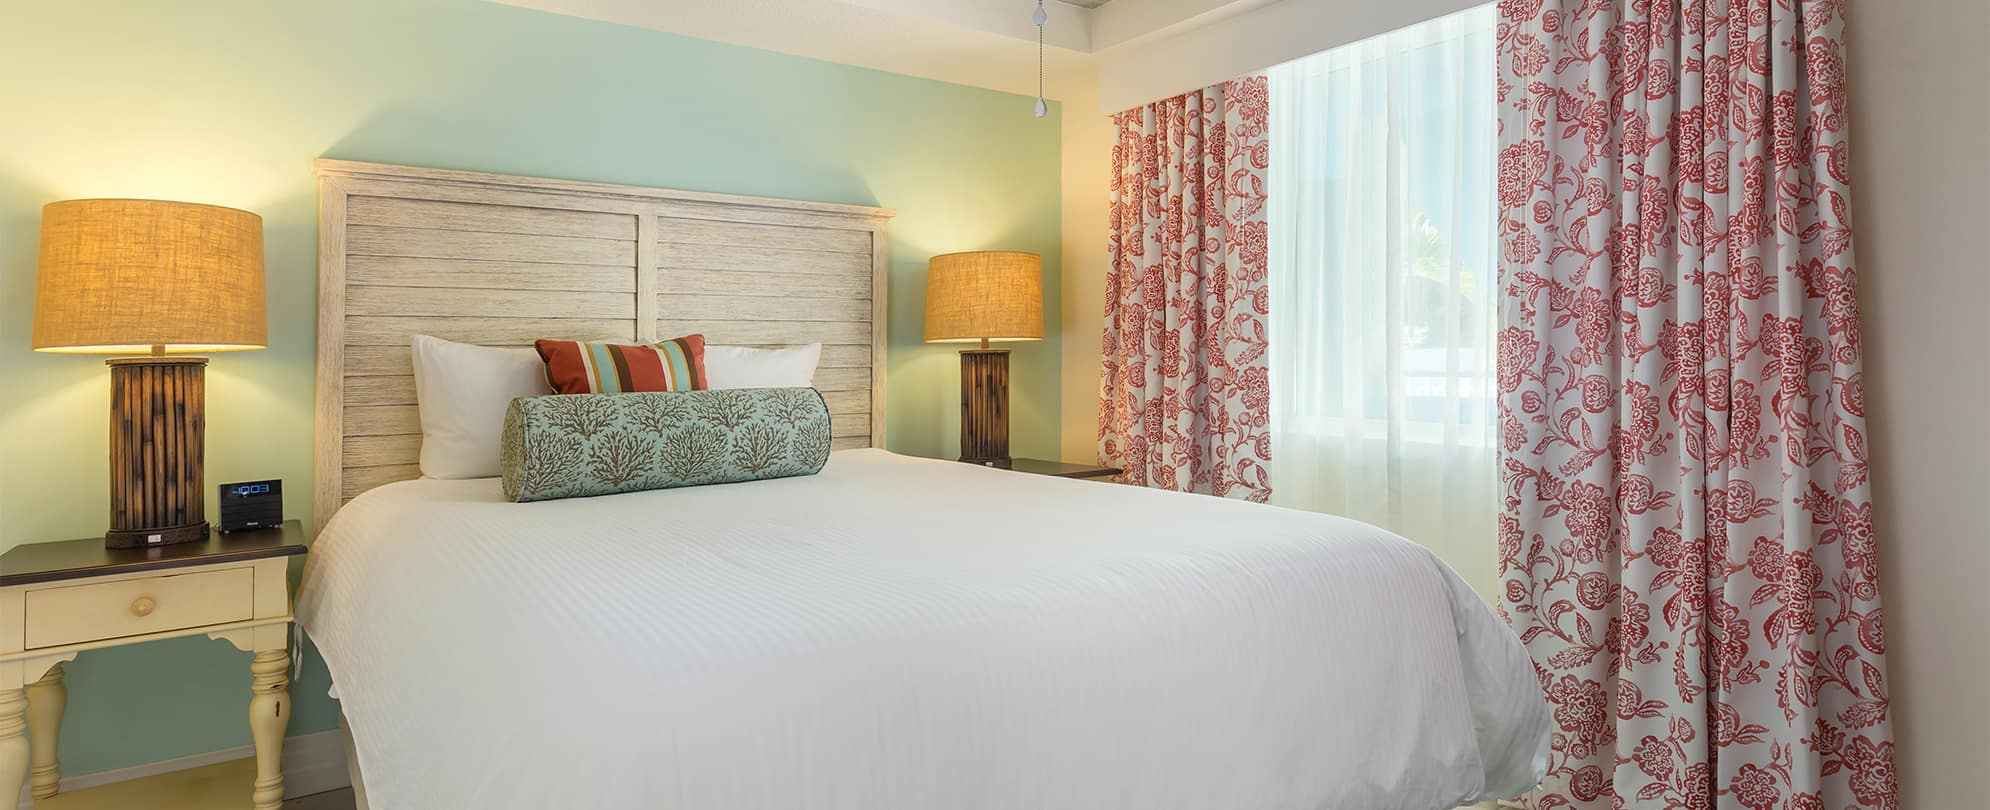 Bed with a white linens and wood headboard in a Presidential Reserve suite at Margaritaville Vacation Club resort in St. Thomas.